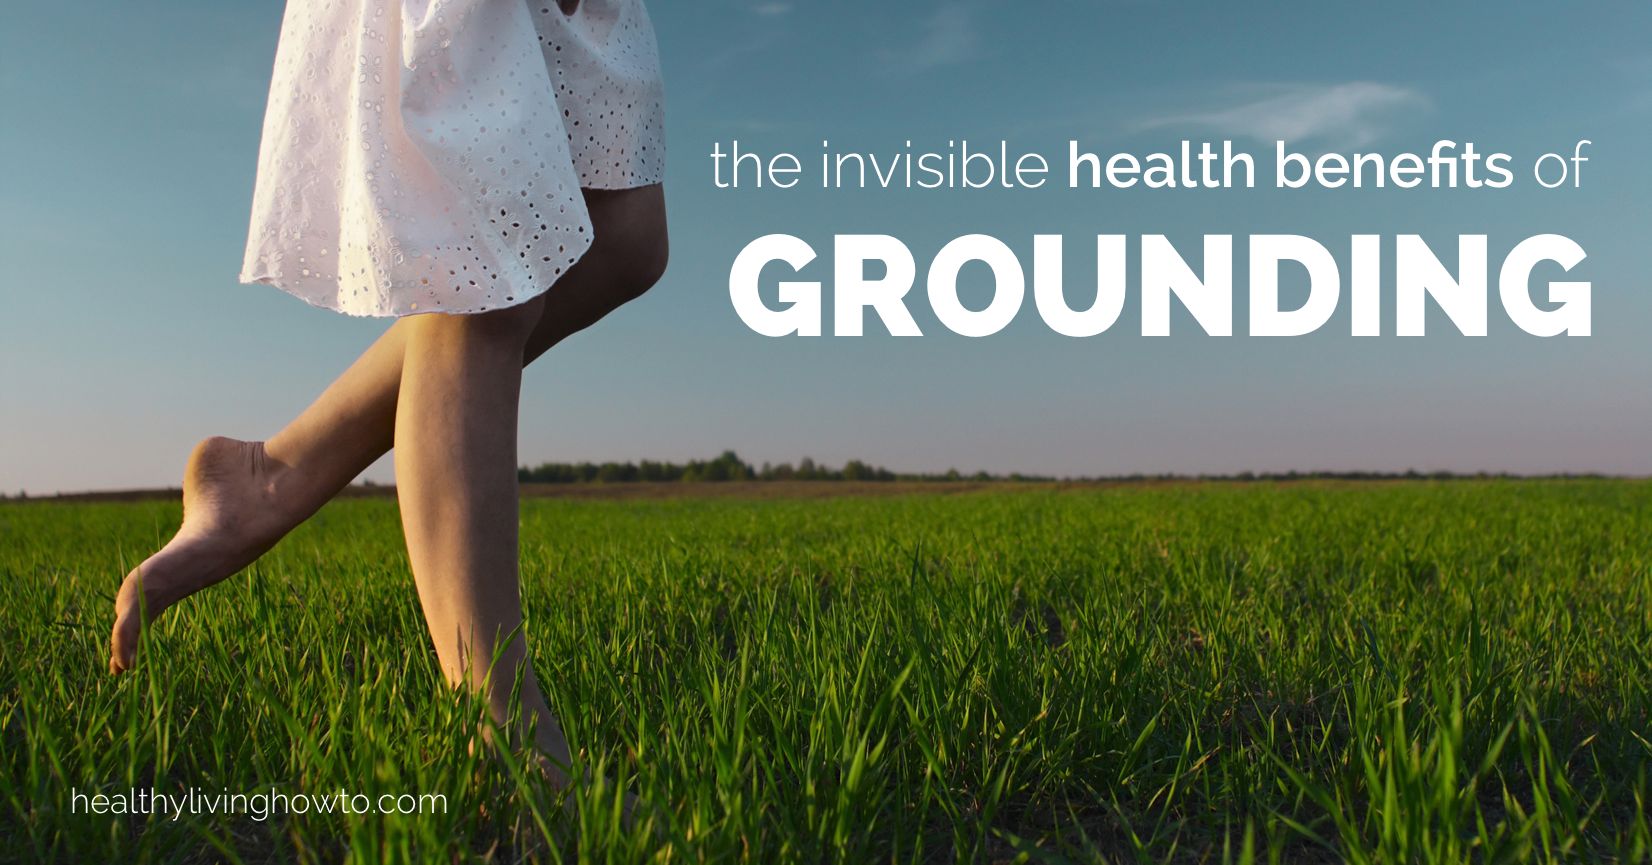 The Invisible Health Benefits of Grounding | healthylivinghowto.com